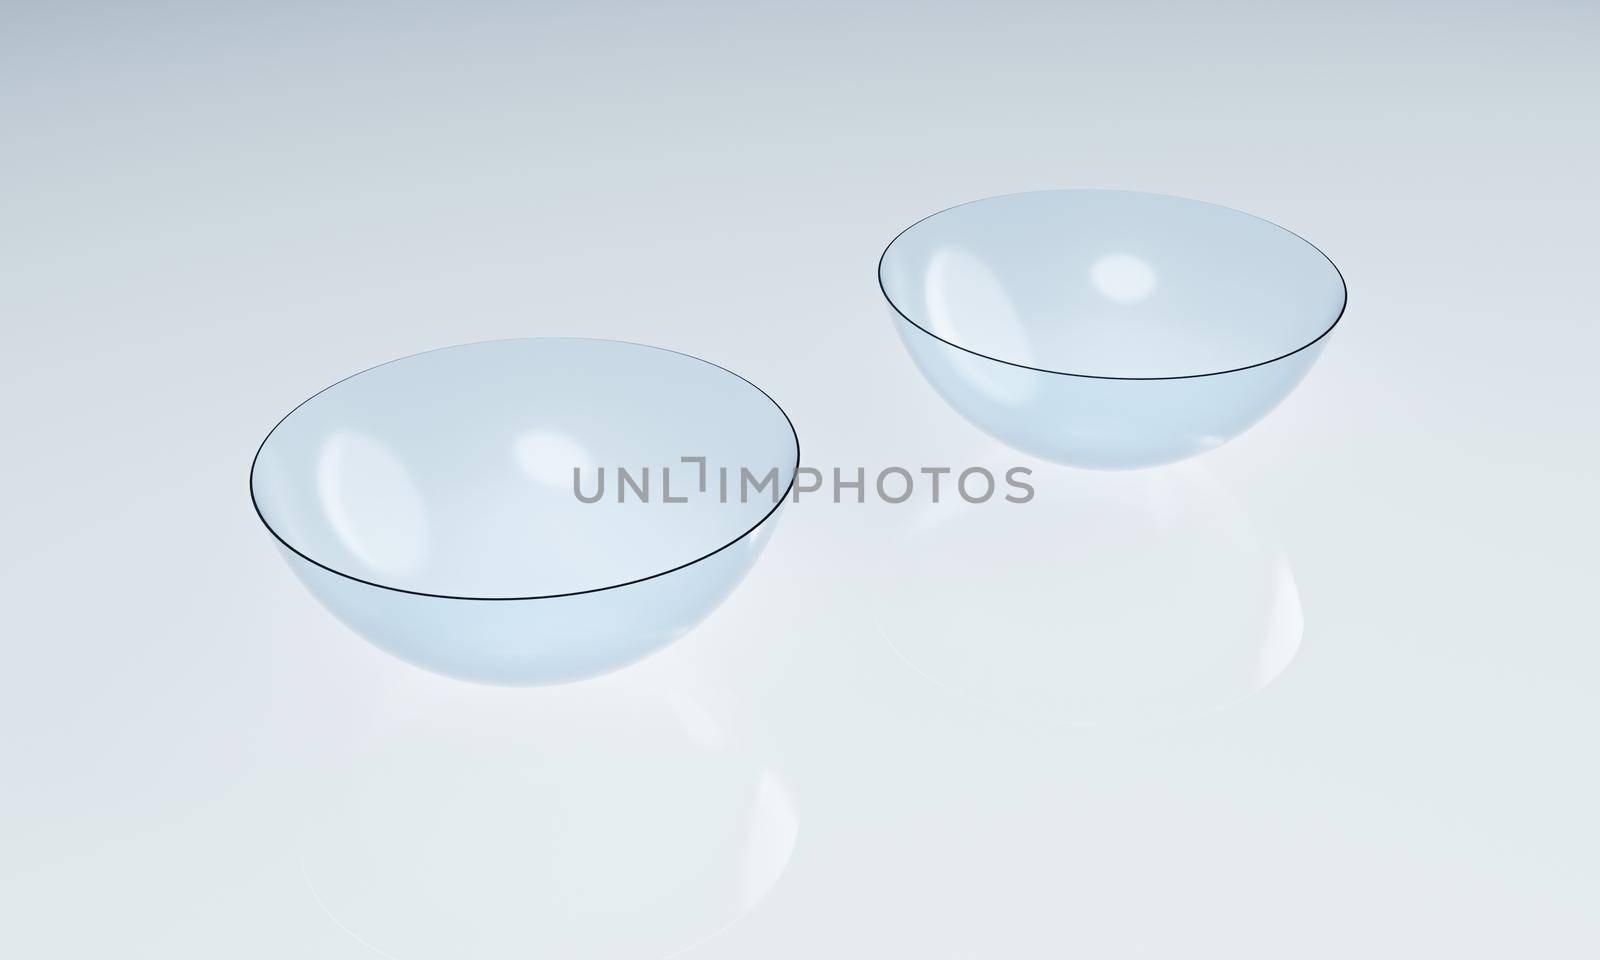 Couple of contact lens on clean reflection floor in laboratory. Optics medical and healthcare concept. 3D illustration rendering